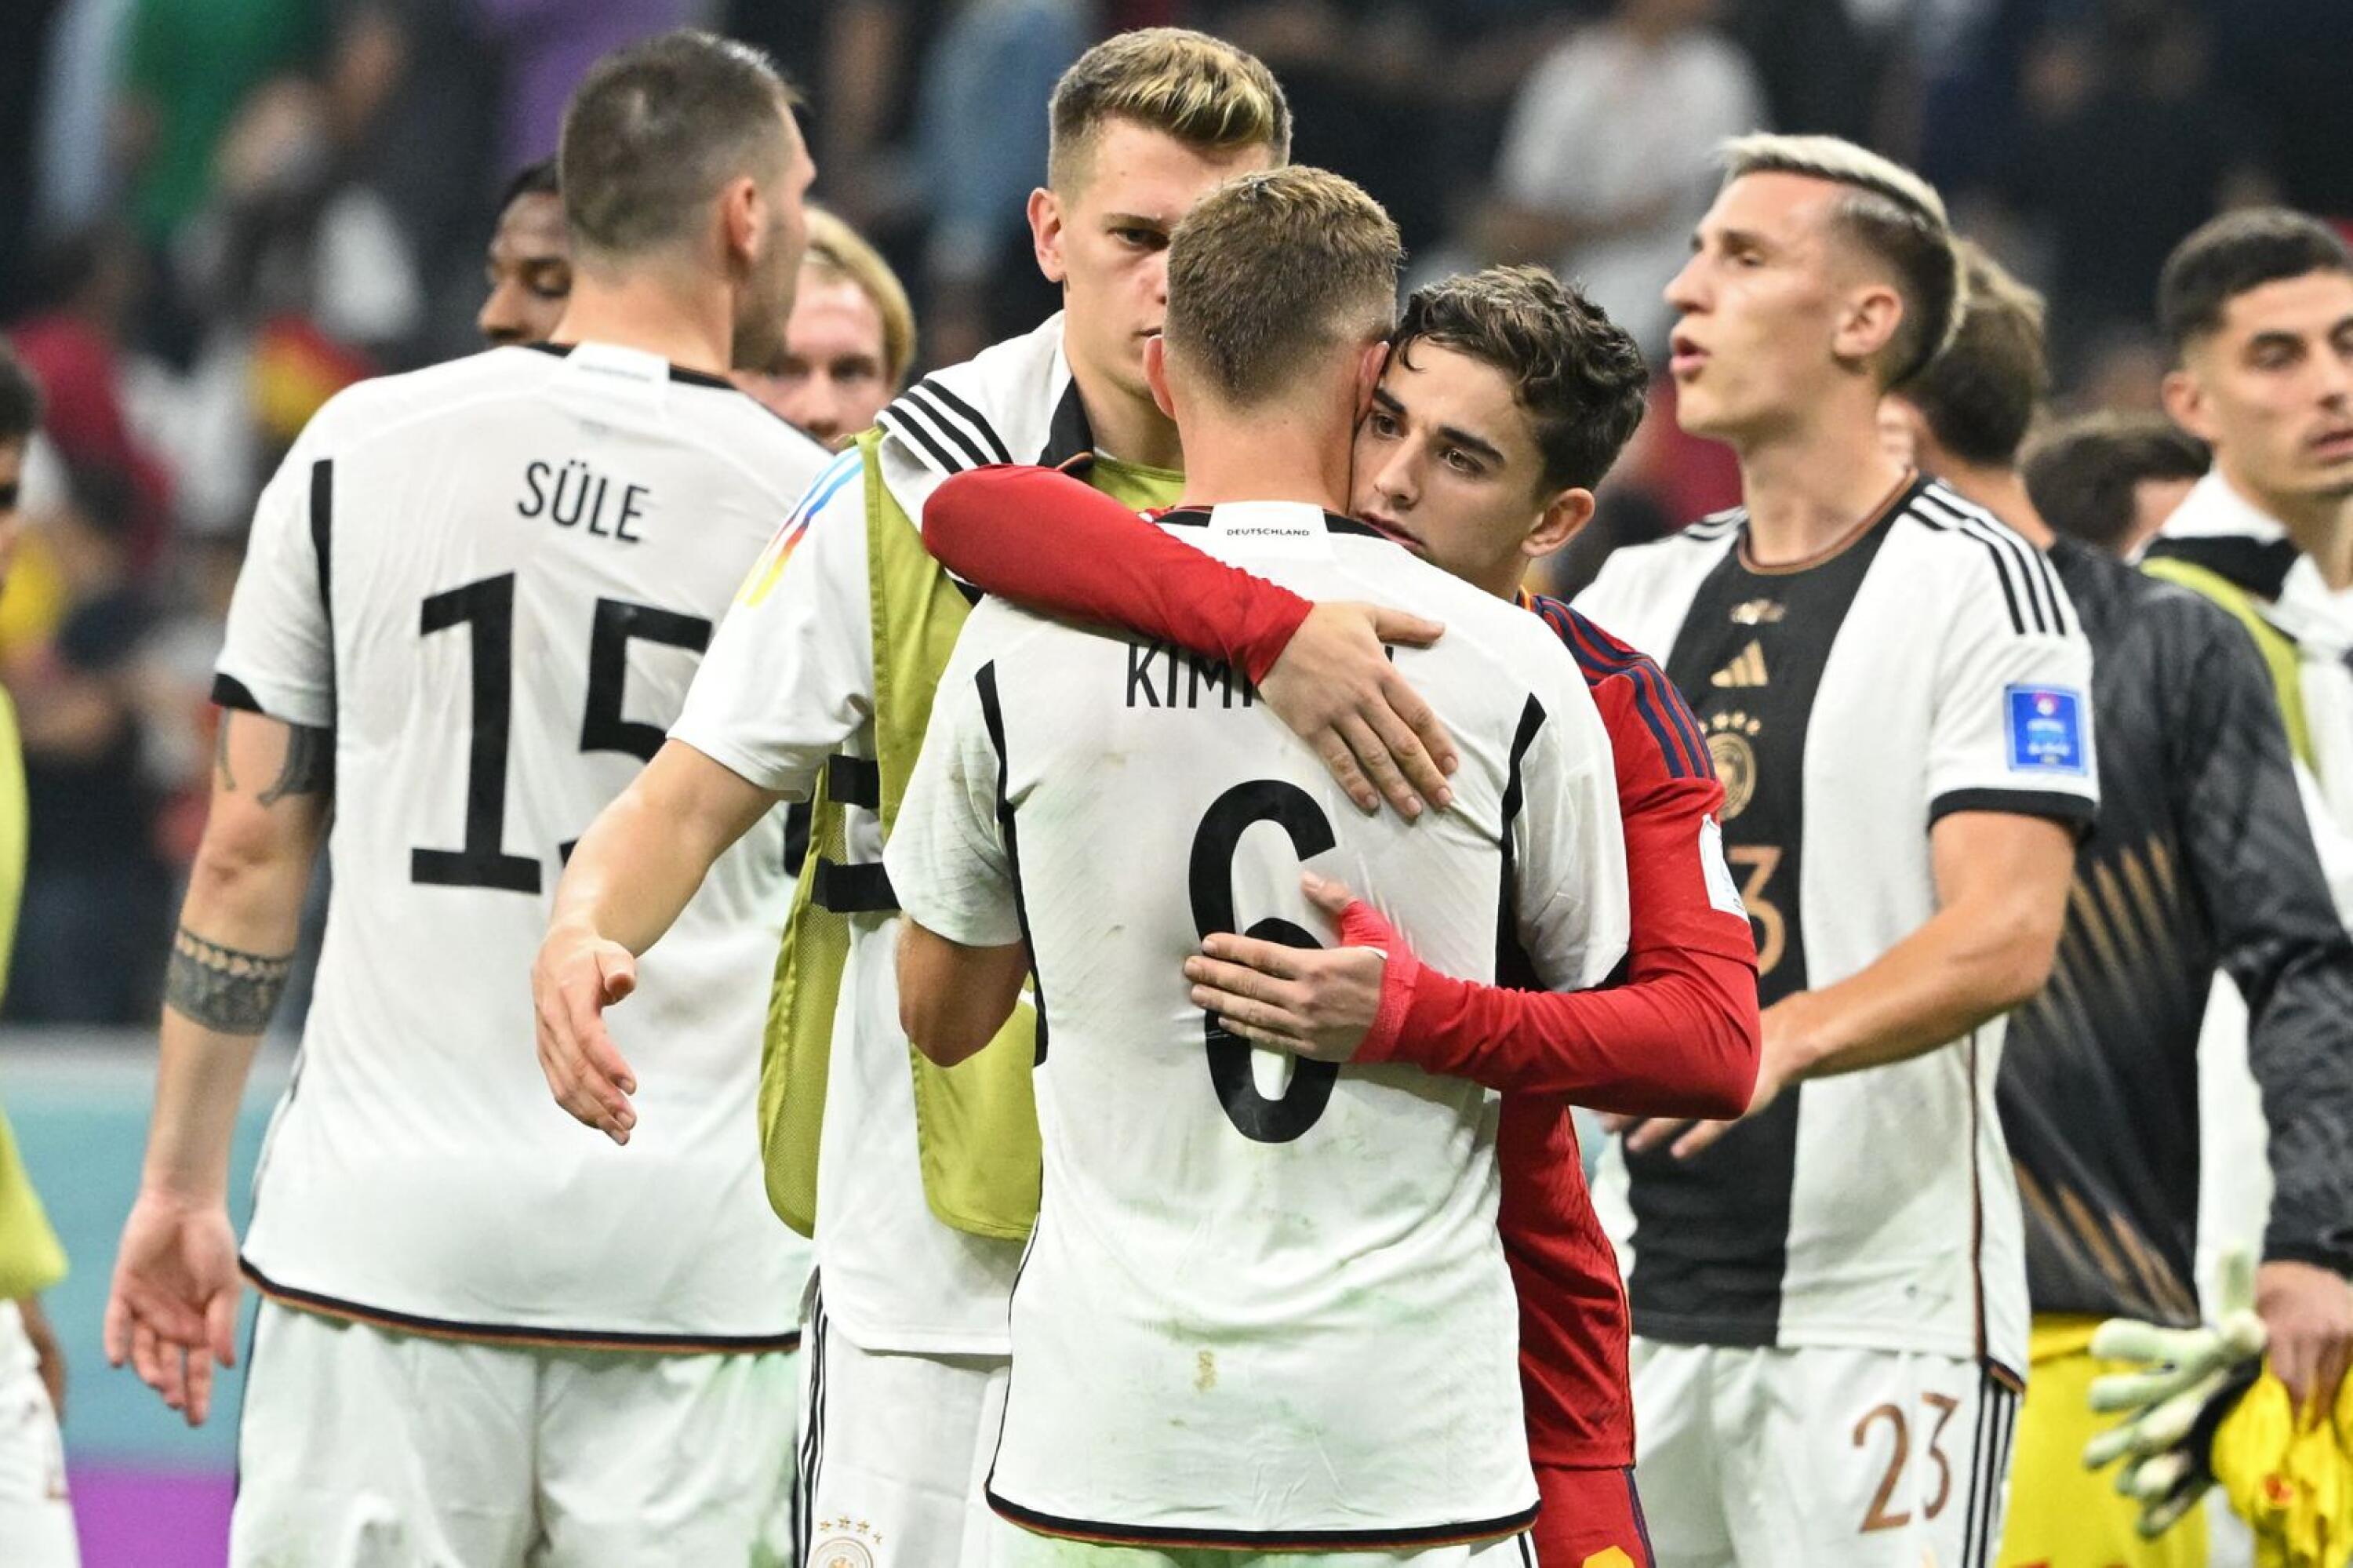 Germany's Joshua Kimmich hugs Spain's Gavi at the end of their Qatar 2022 World Cup Group E football match at the Al-Bayt Stadium in Al Khor, north of Doha on Sunday